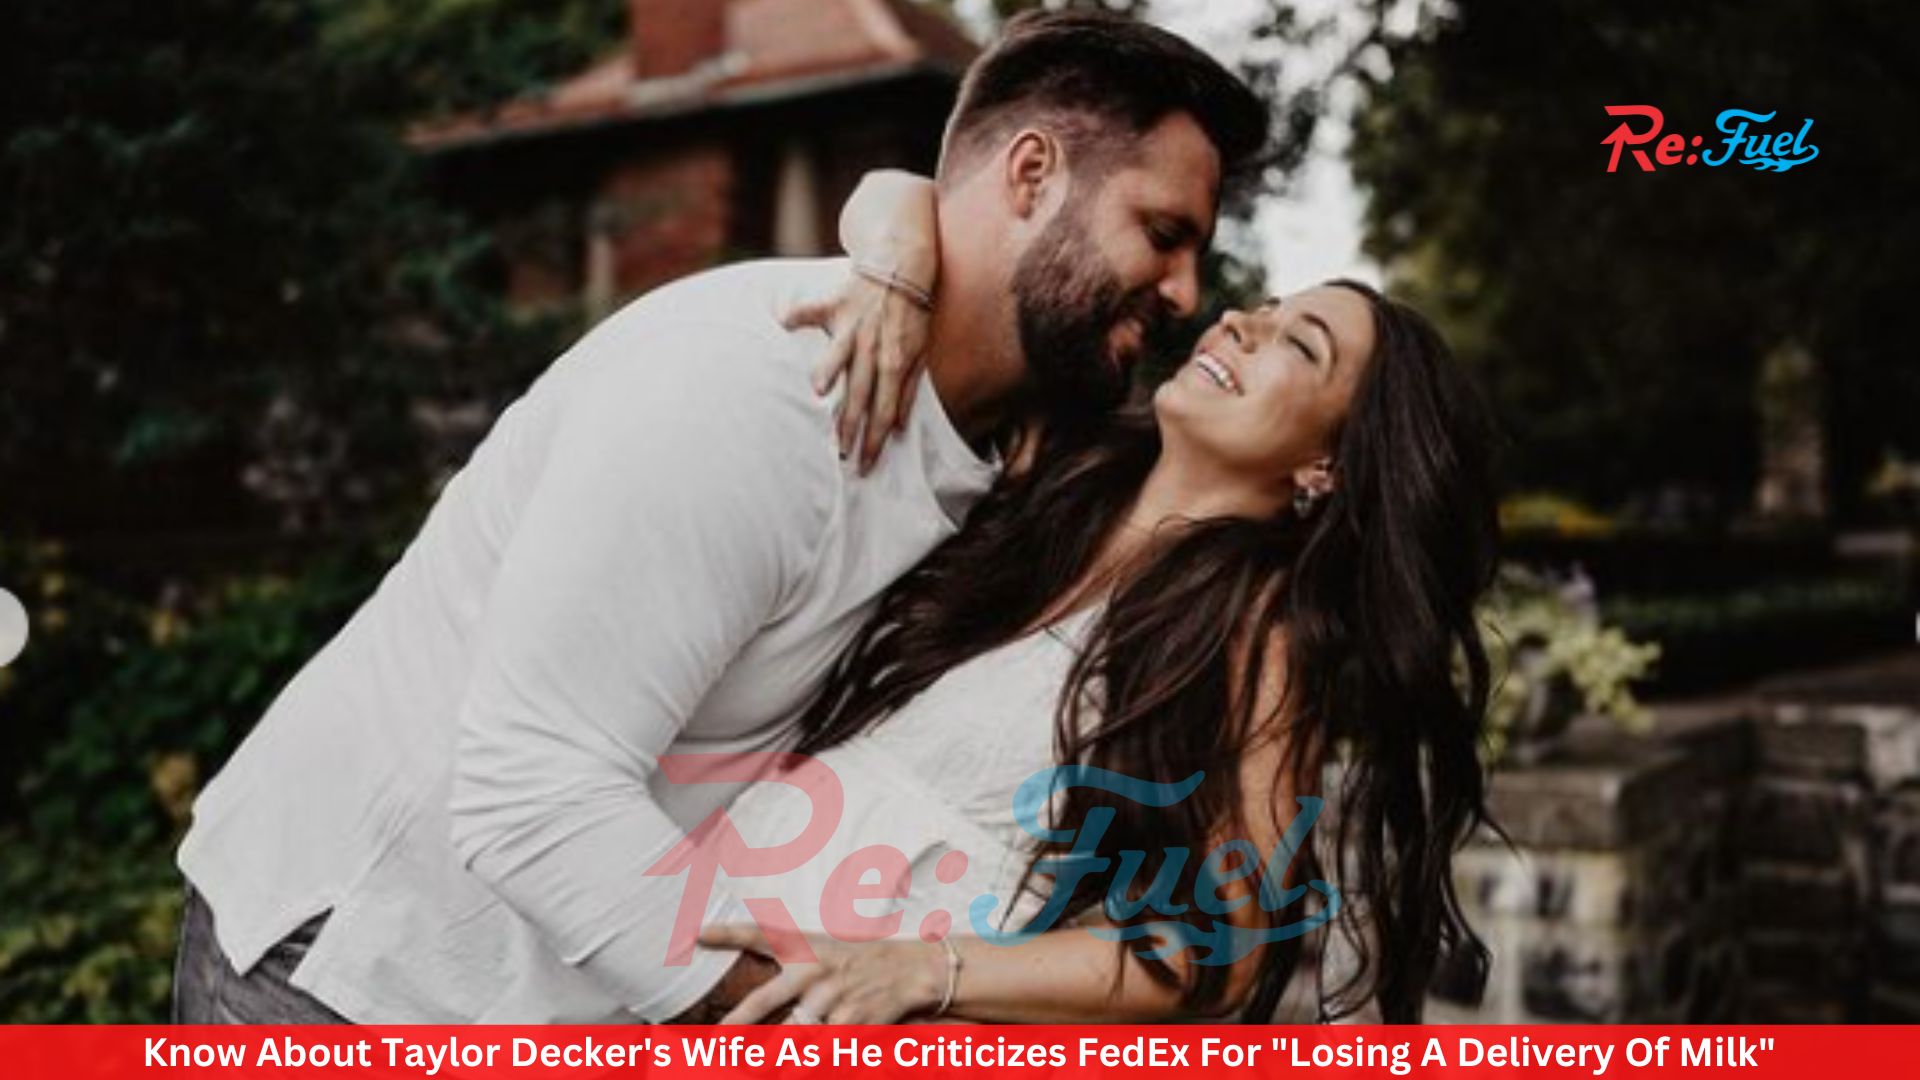 Know About Taylor Decker's Wife As He Criticizes FedEx For "Losing A Delivery Of Milk"